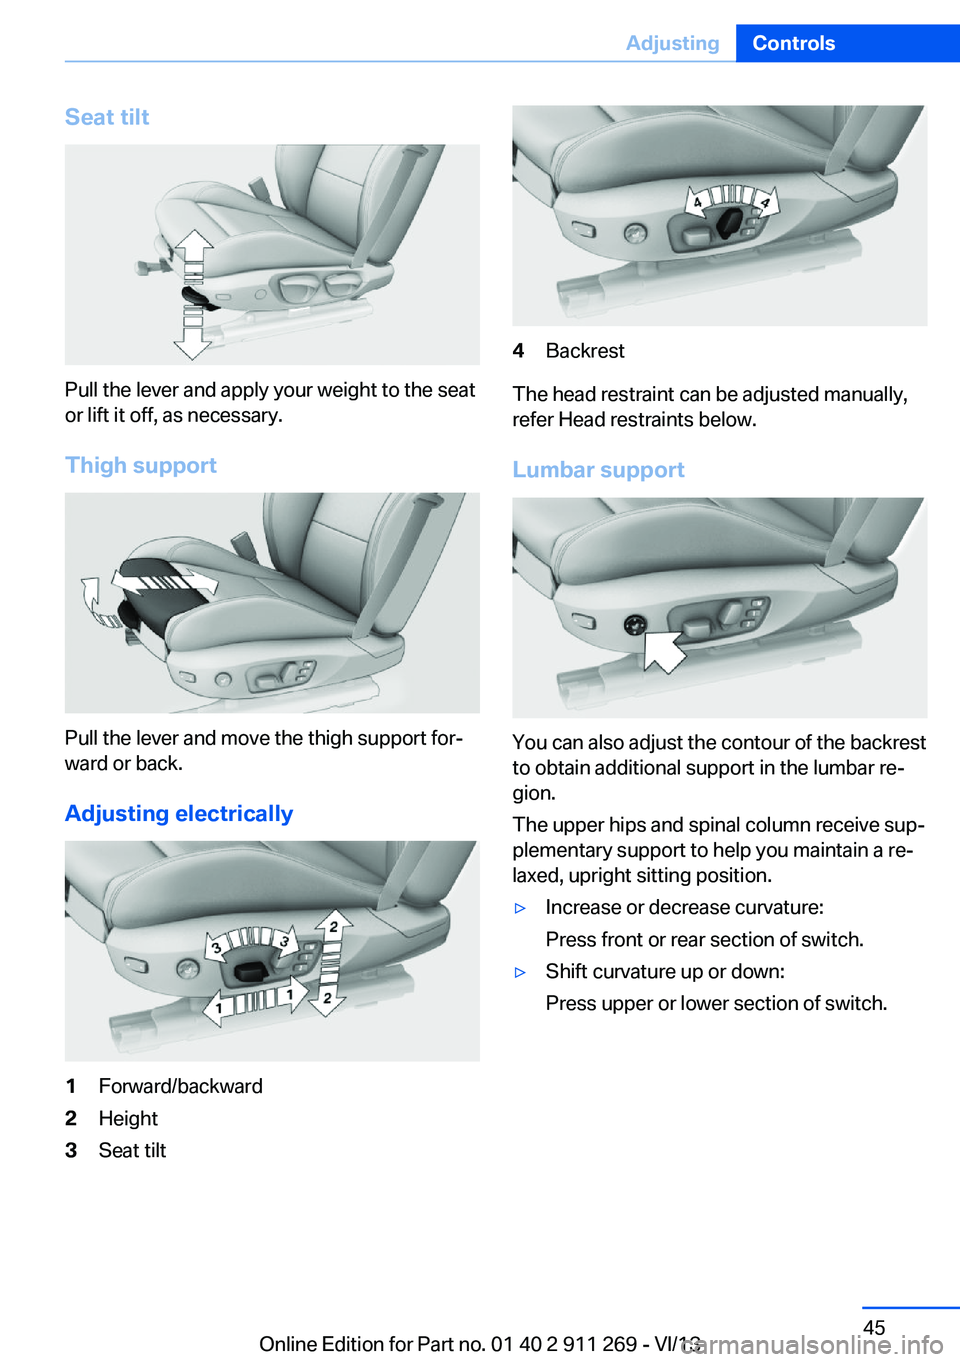 BMW X1 SDRIVE28I 2014  Owners Manual Seat tilt
Pull the lever and apply your weight to the seat
or lift it off, as necessary.
Thigh support
Pull the lever and move the thigh support for‐
ward or back.
Adjusting electrically
1Forward/ba